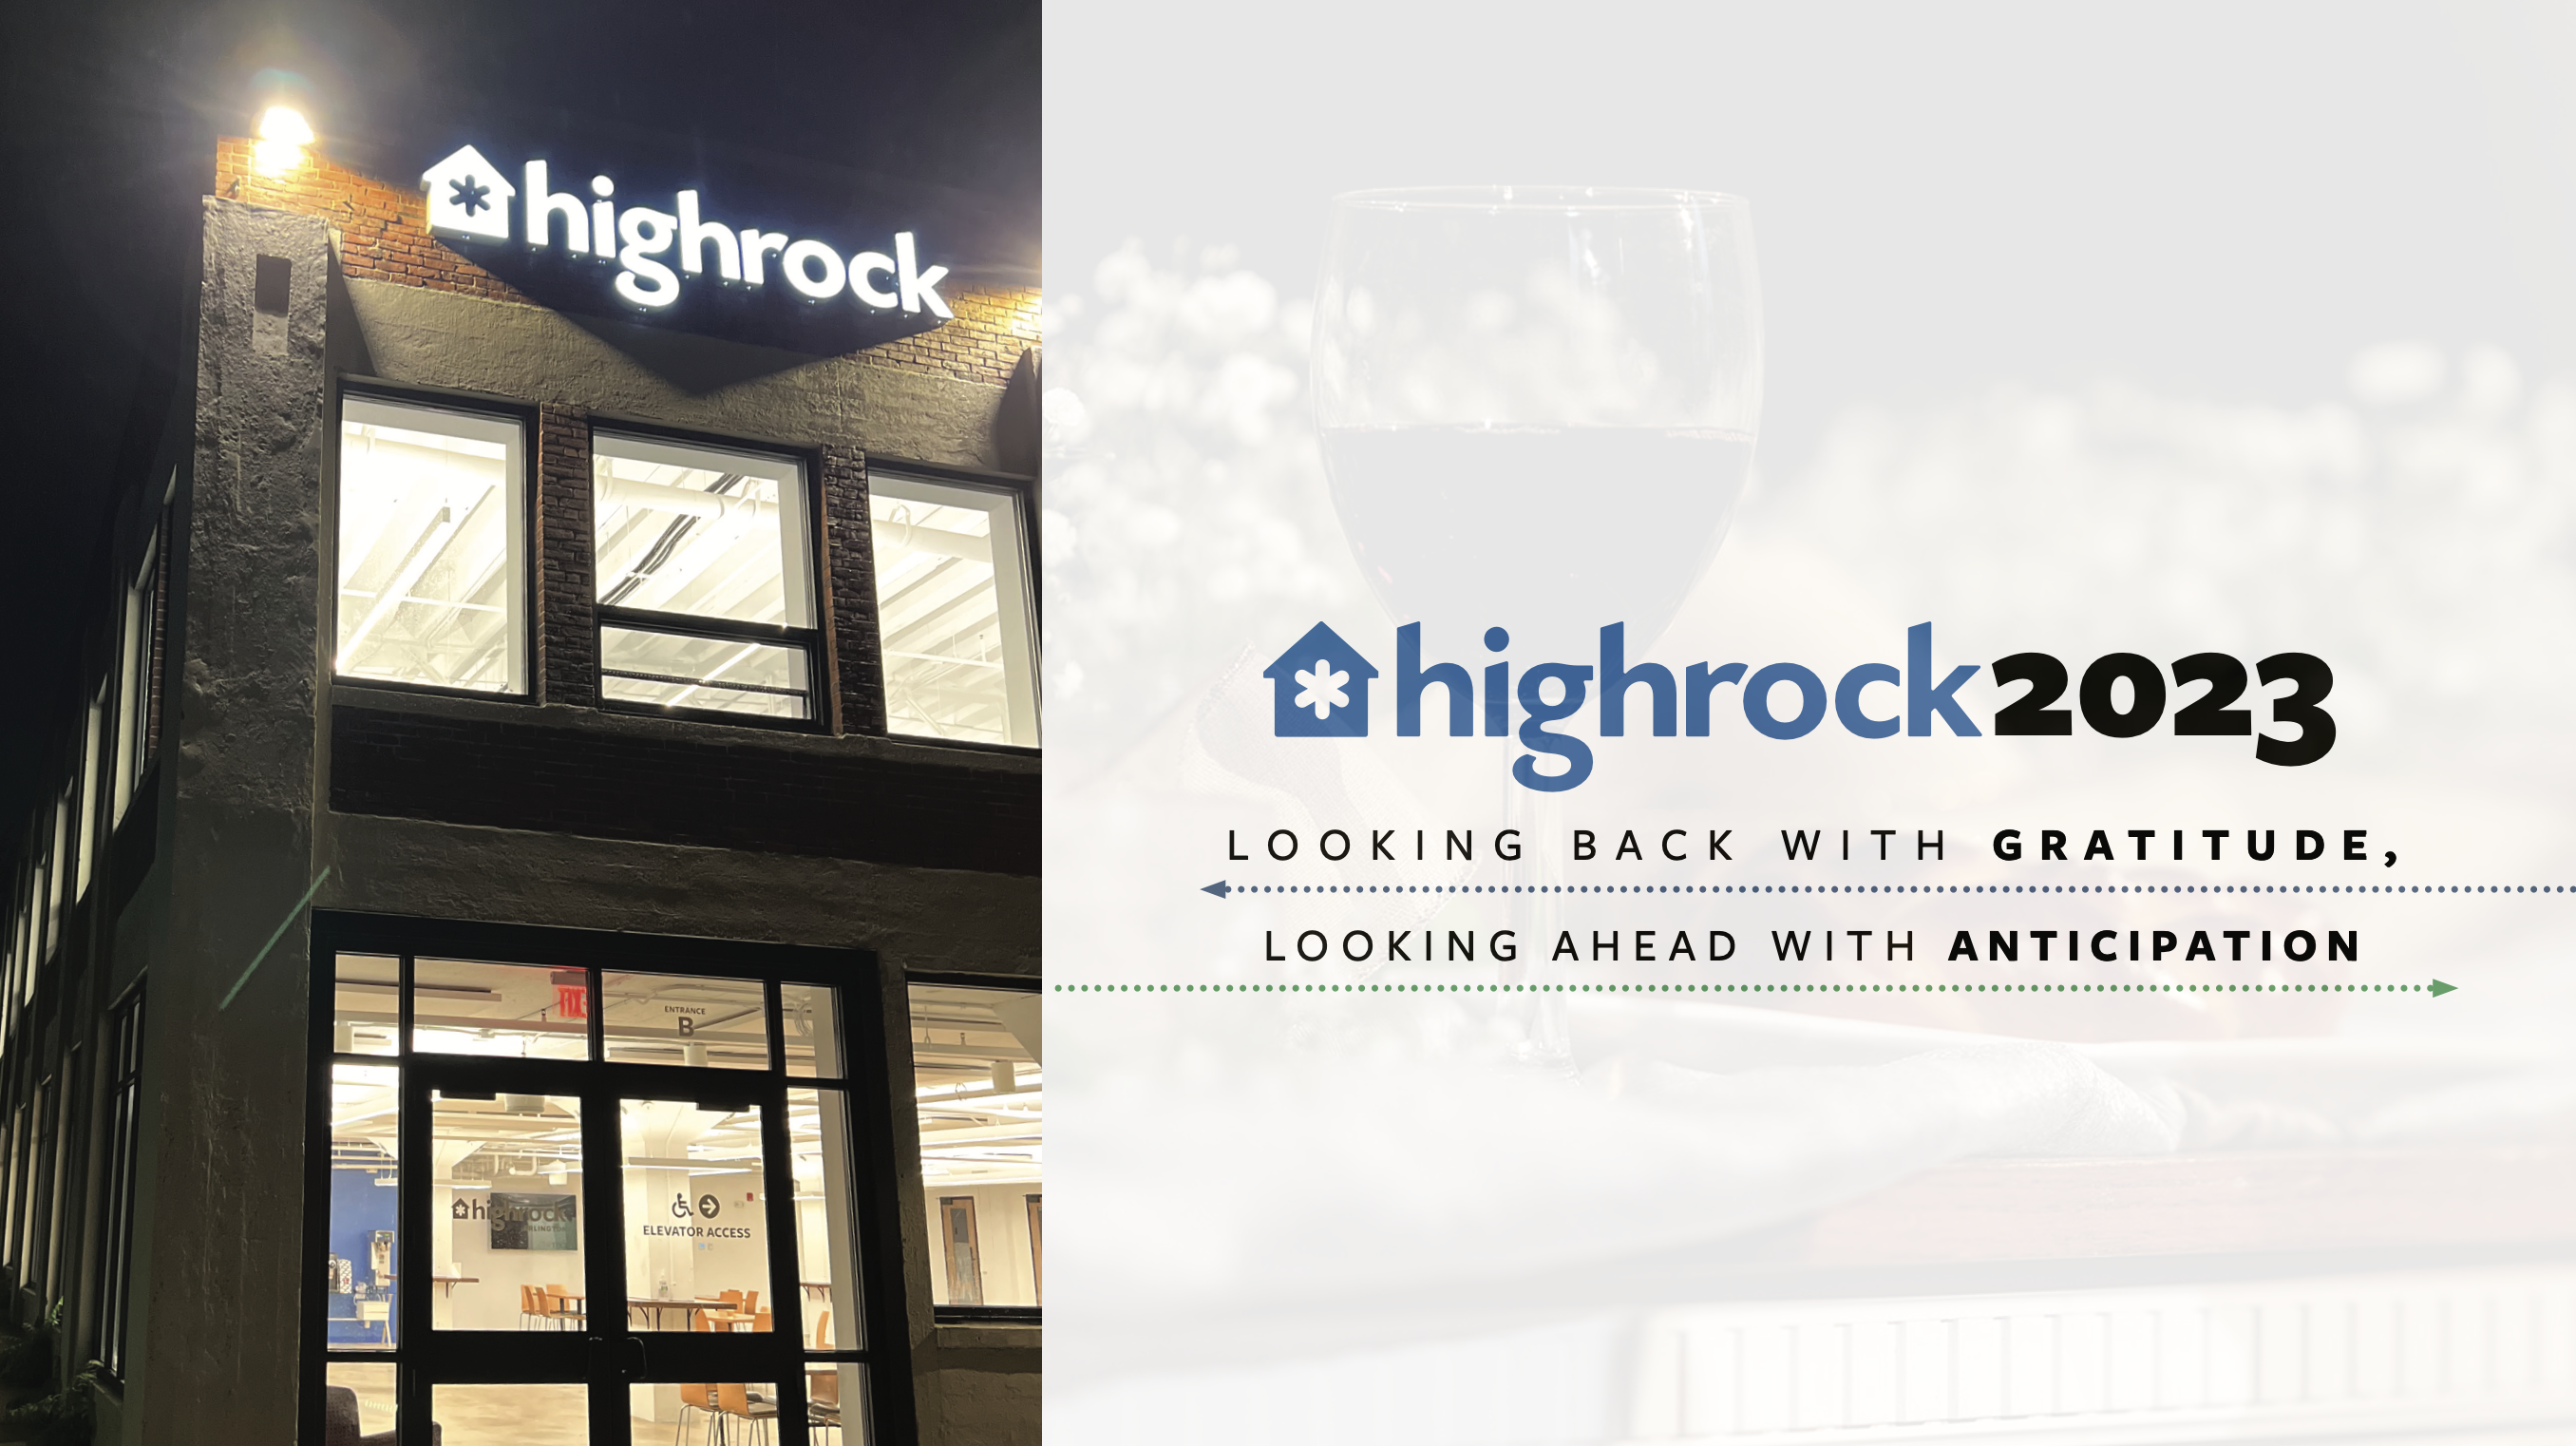 Highrock 2023: Looking Back with Gratitude, Looking Ahead with Anticipation